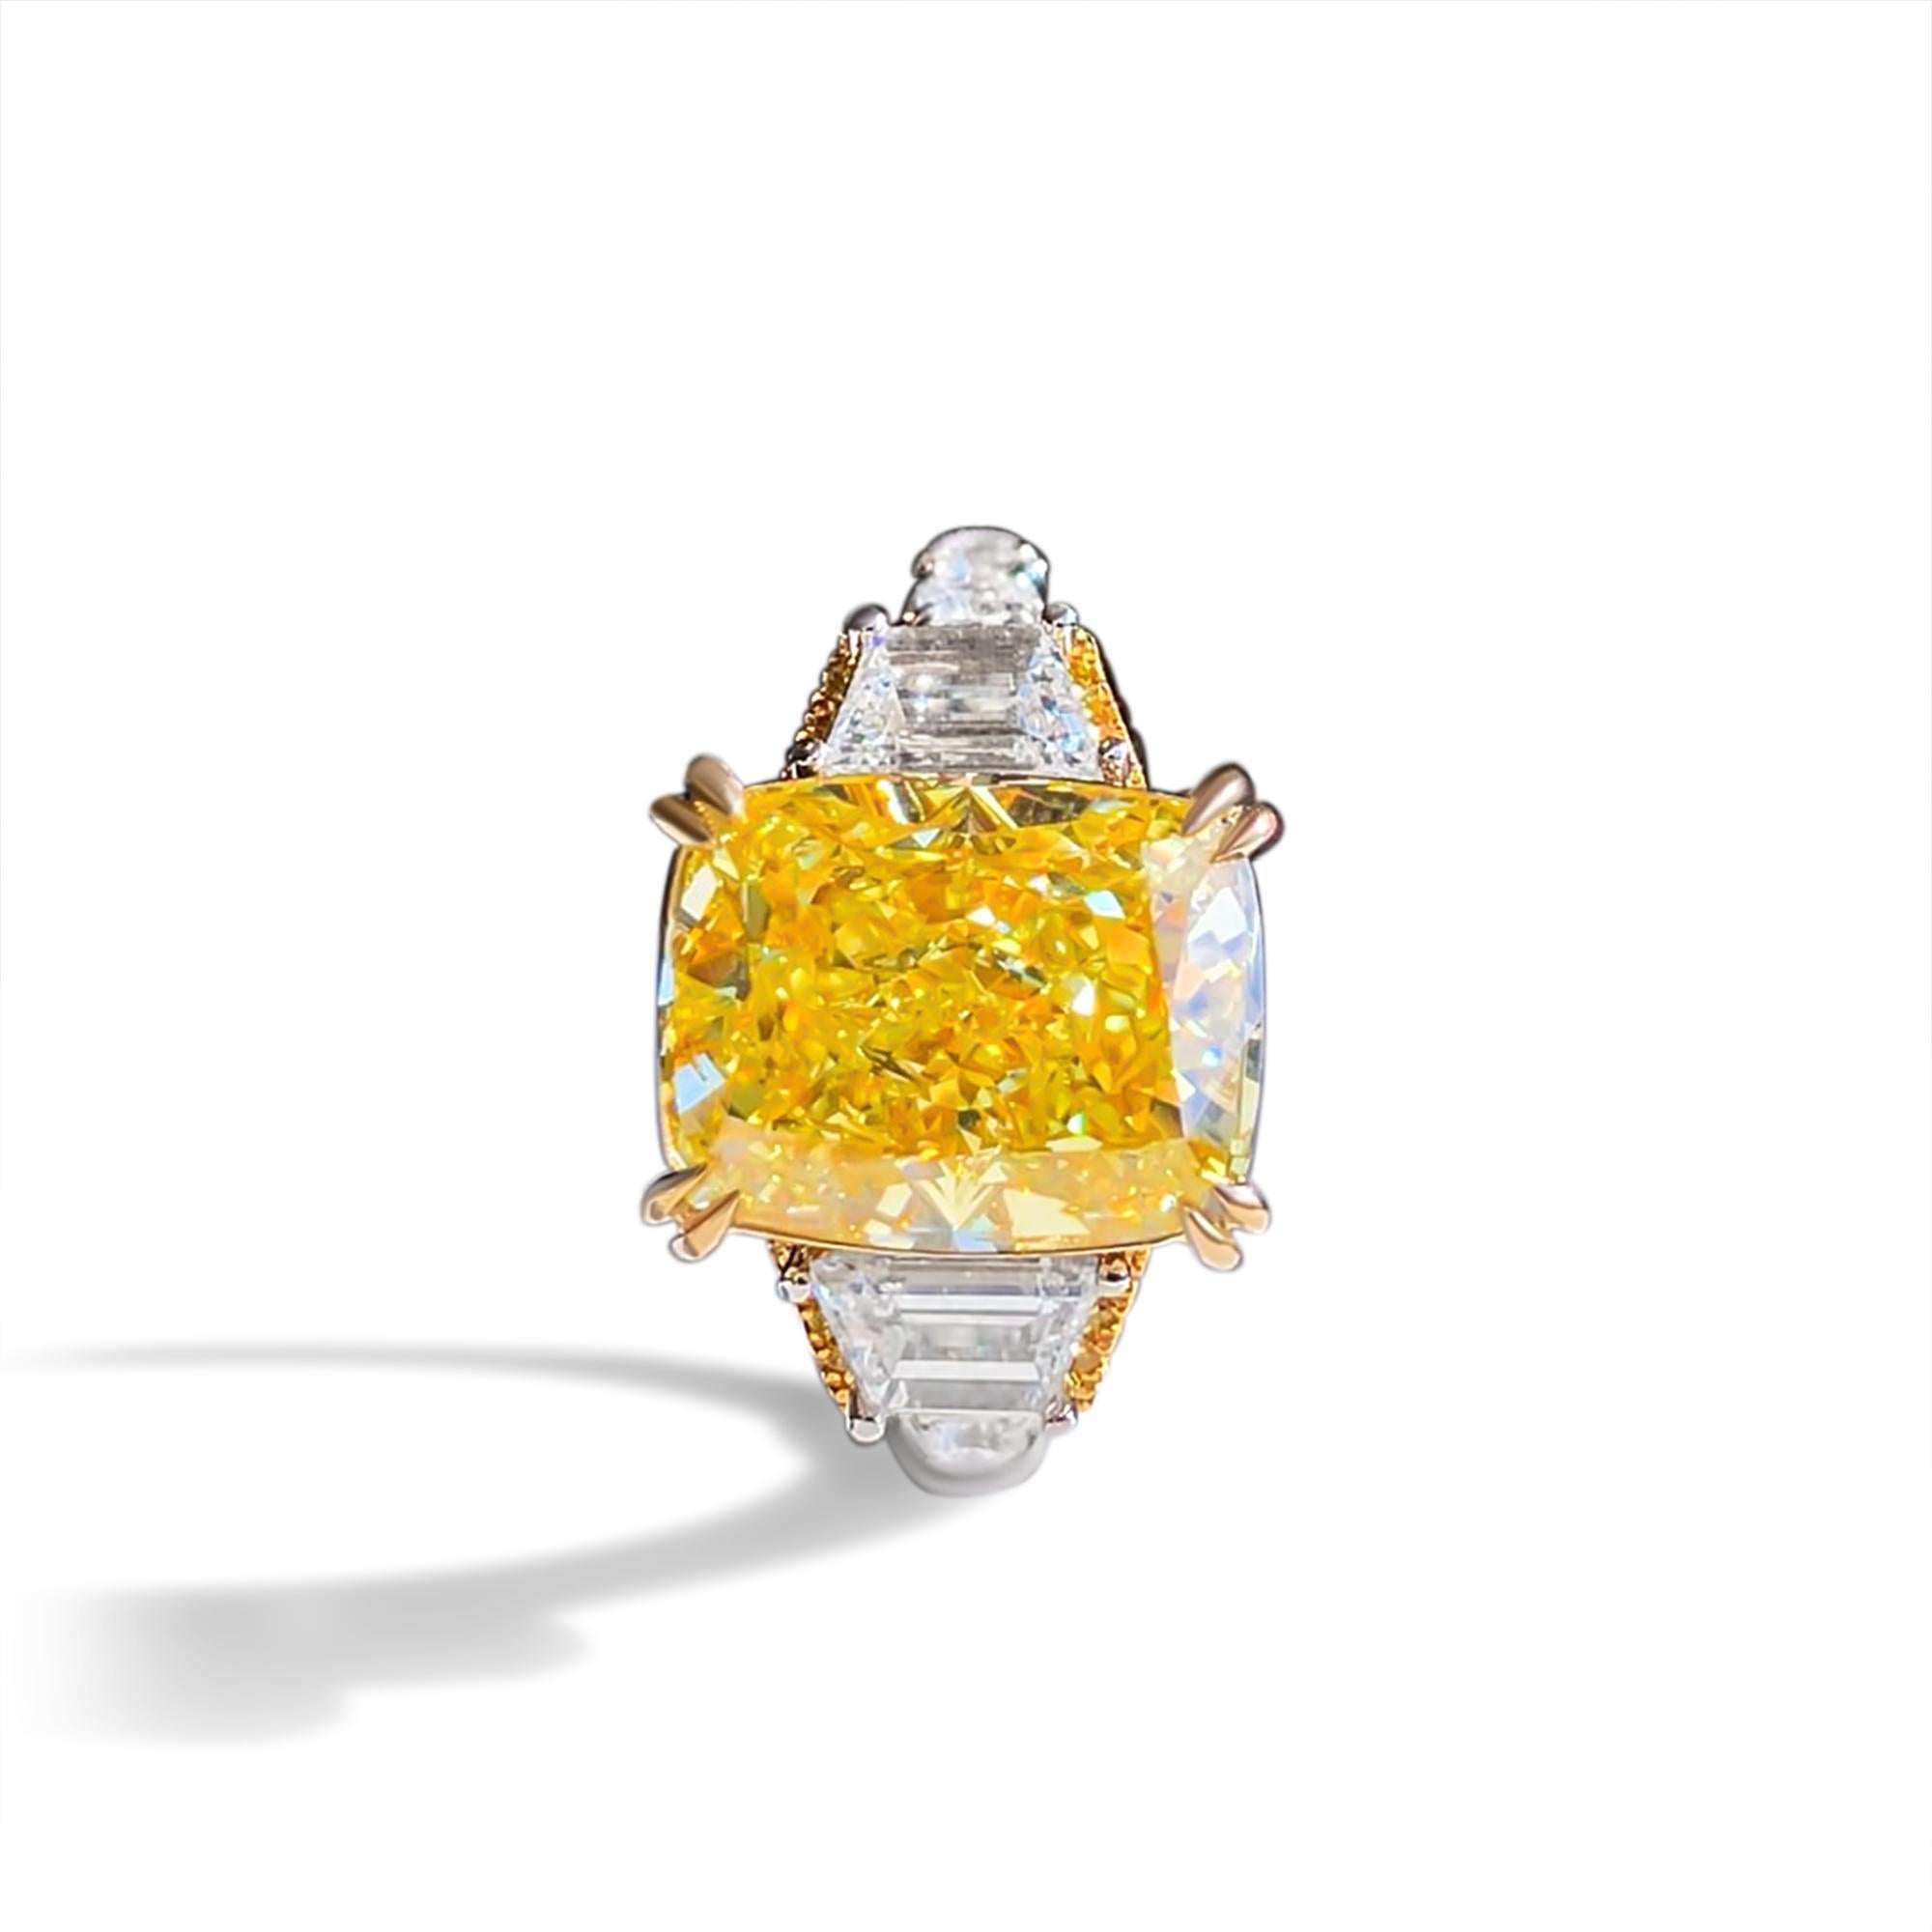 We invite you to discover this majestic ring set with a 5.01-carat GIA-certified cushion-cut yellow diamond accented with colorless and yellow diamonds. It would be perfect for a marriage proposal and engagement. 

New ring 
Main diamond: Fancy